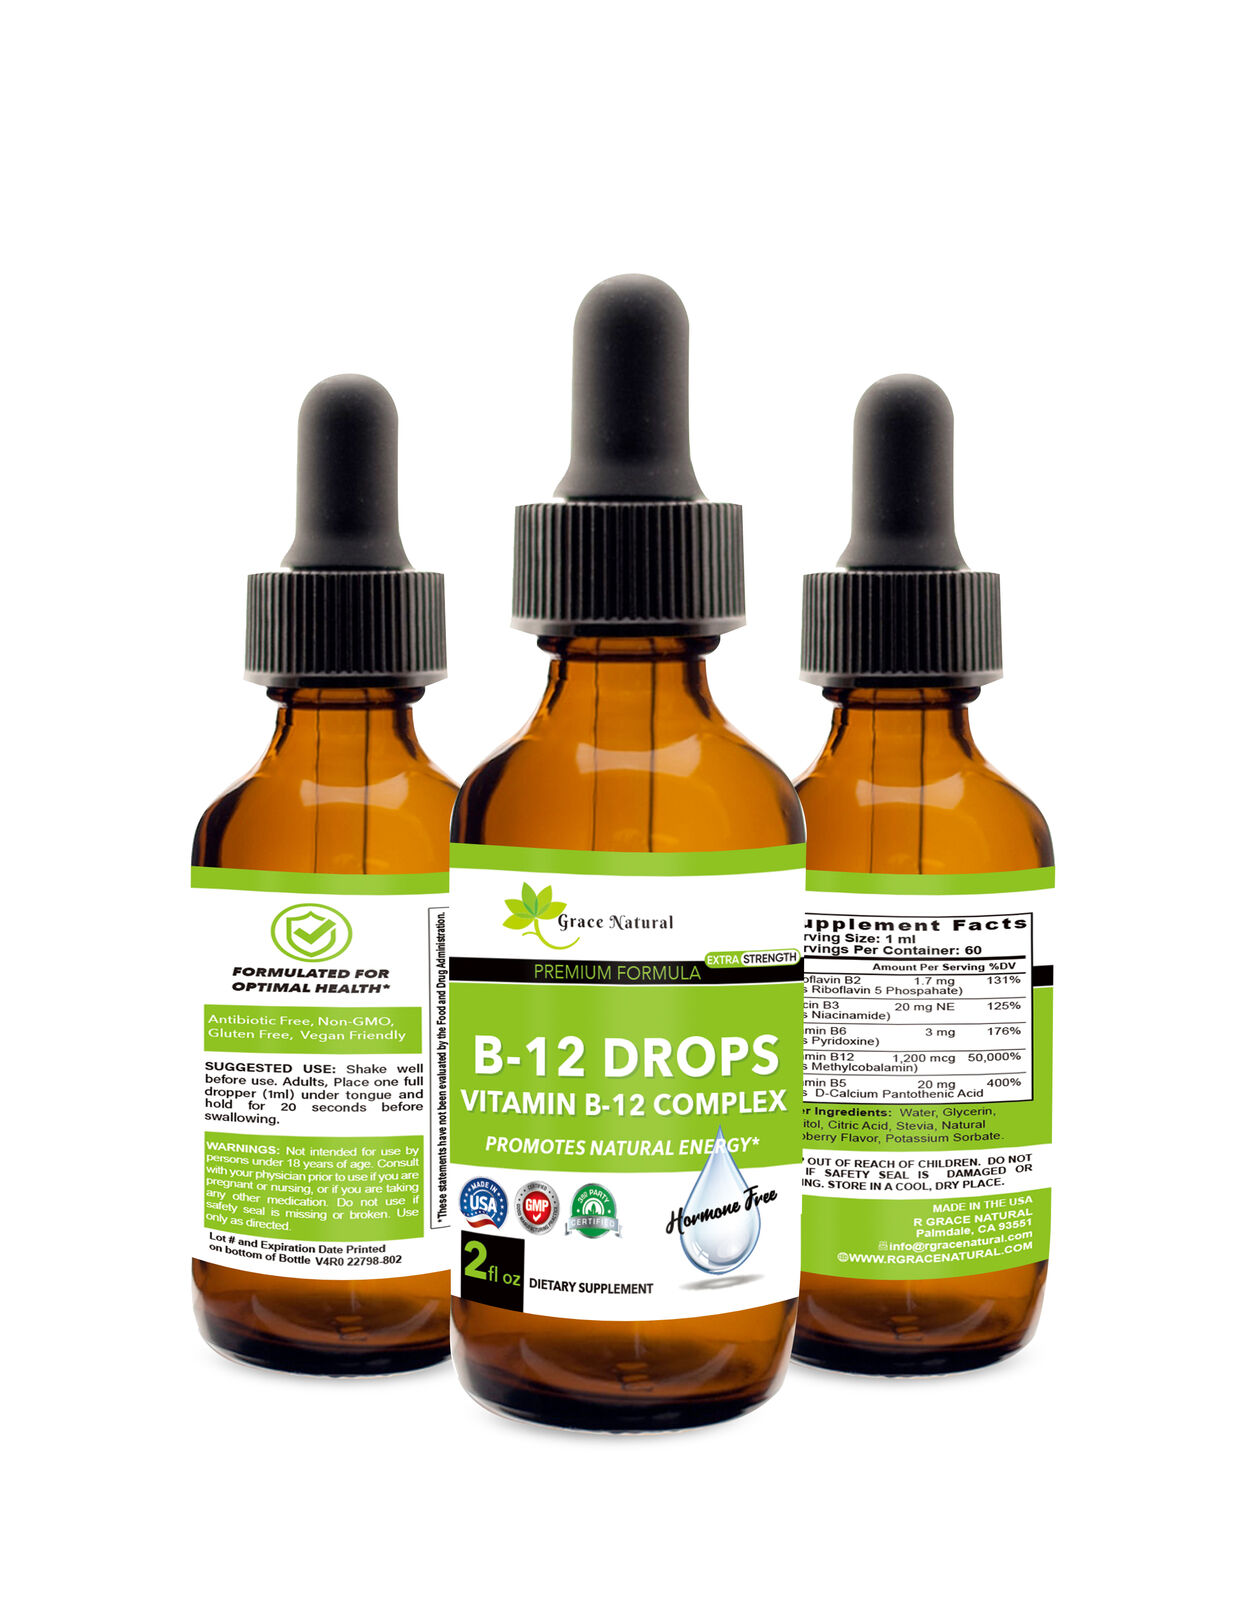 B-12 Drops Vitamin B-12 Complex Promotes Natural Energy 2oz Made In Usa